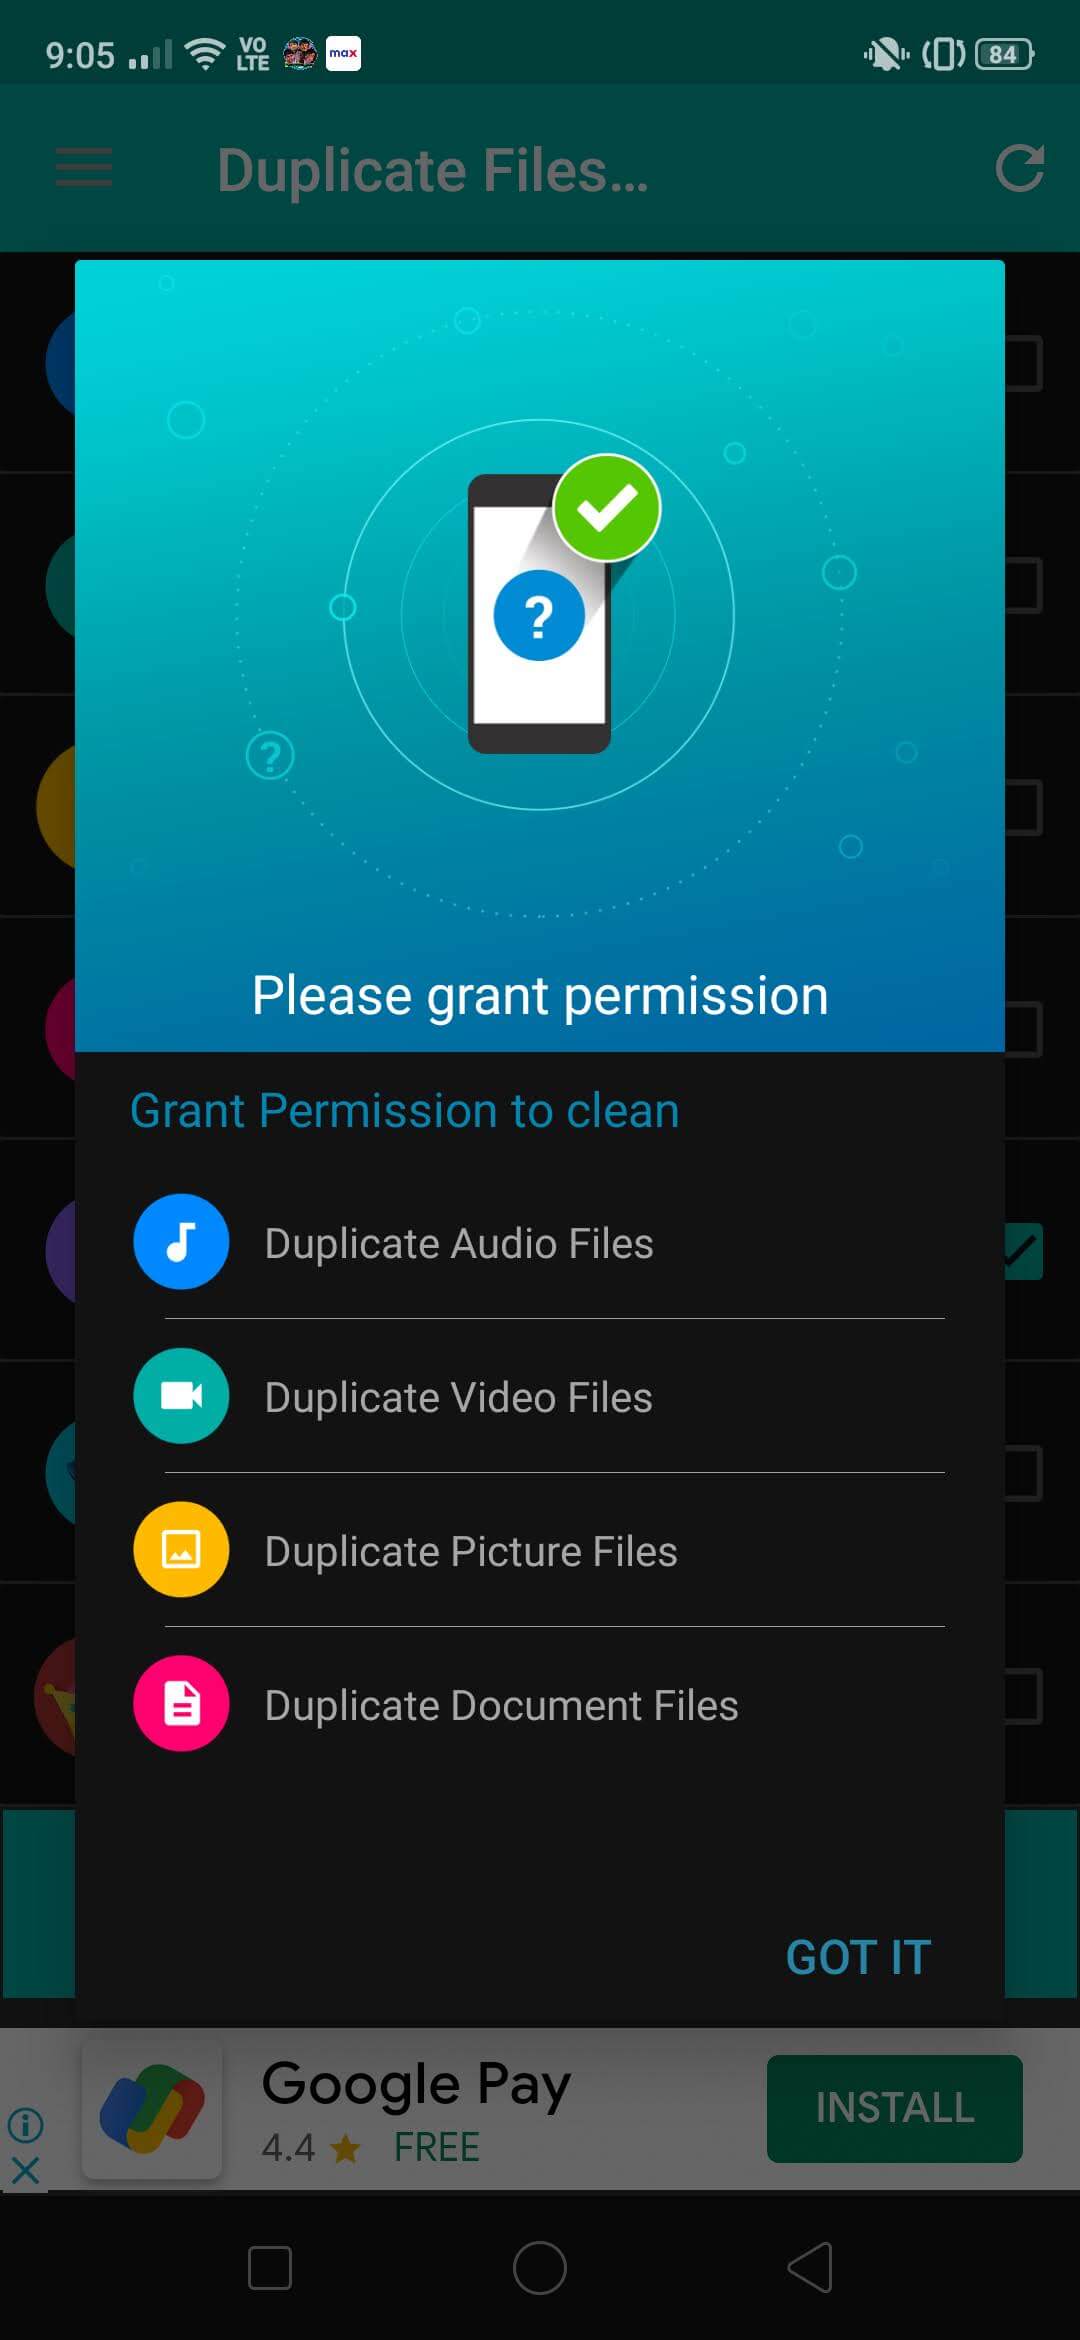 This application will check for duplicates of photos, videos, audios, and all documents in general.